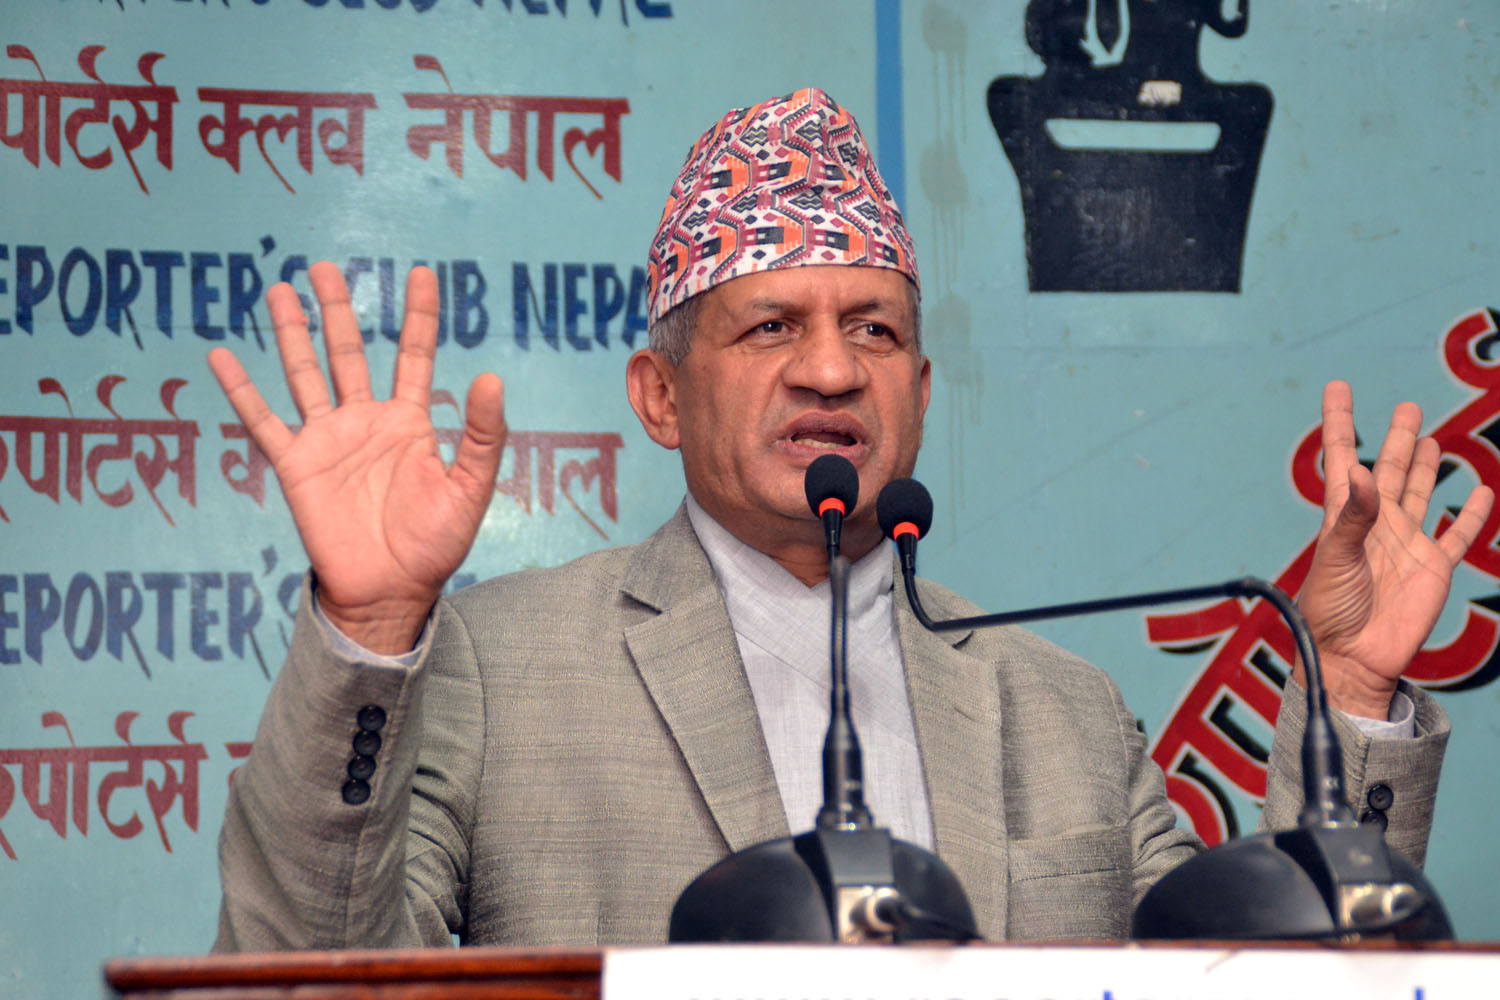 Literary contributions to society spectacular: Minister Gyawali